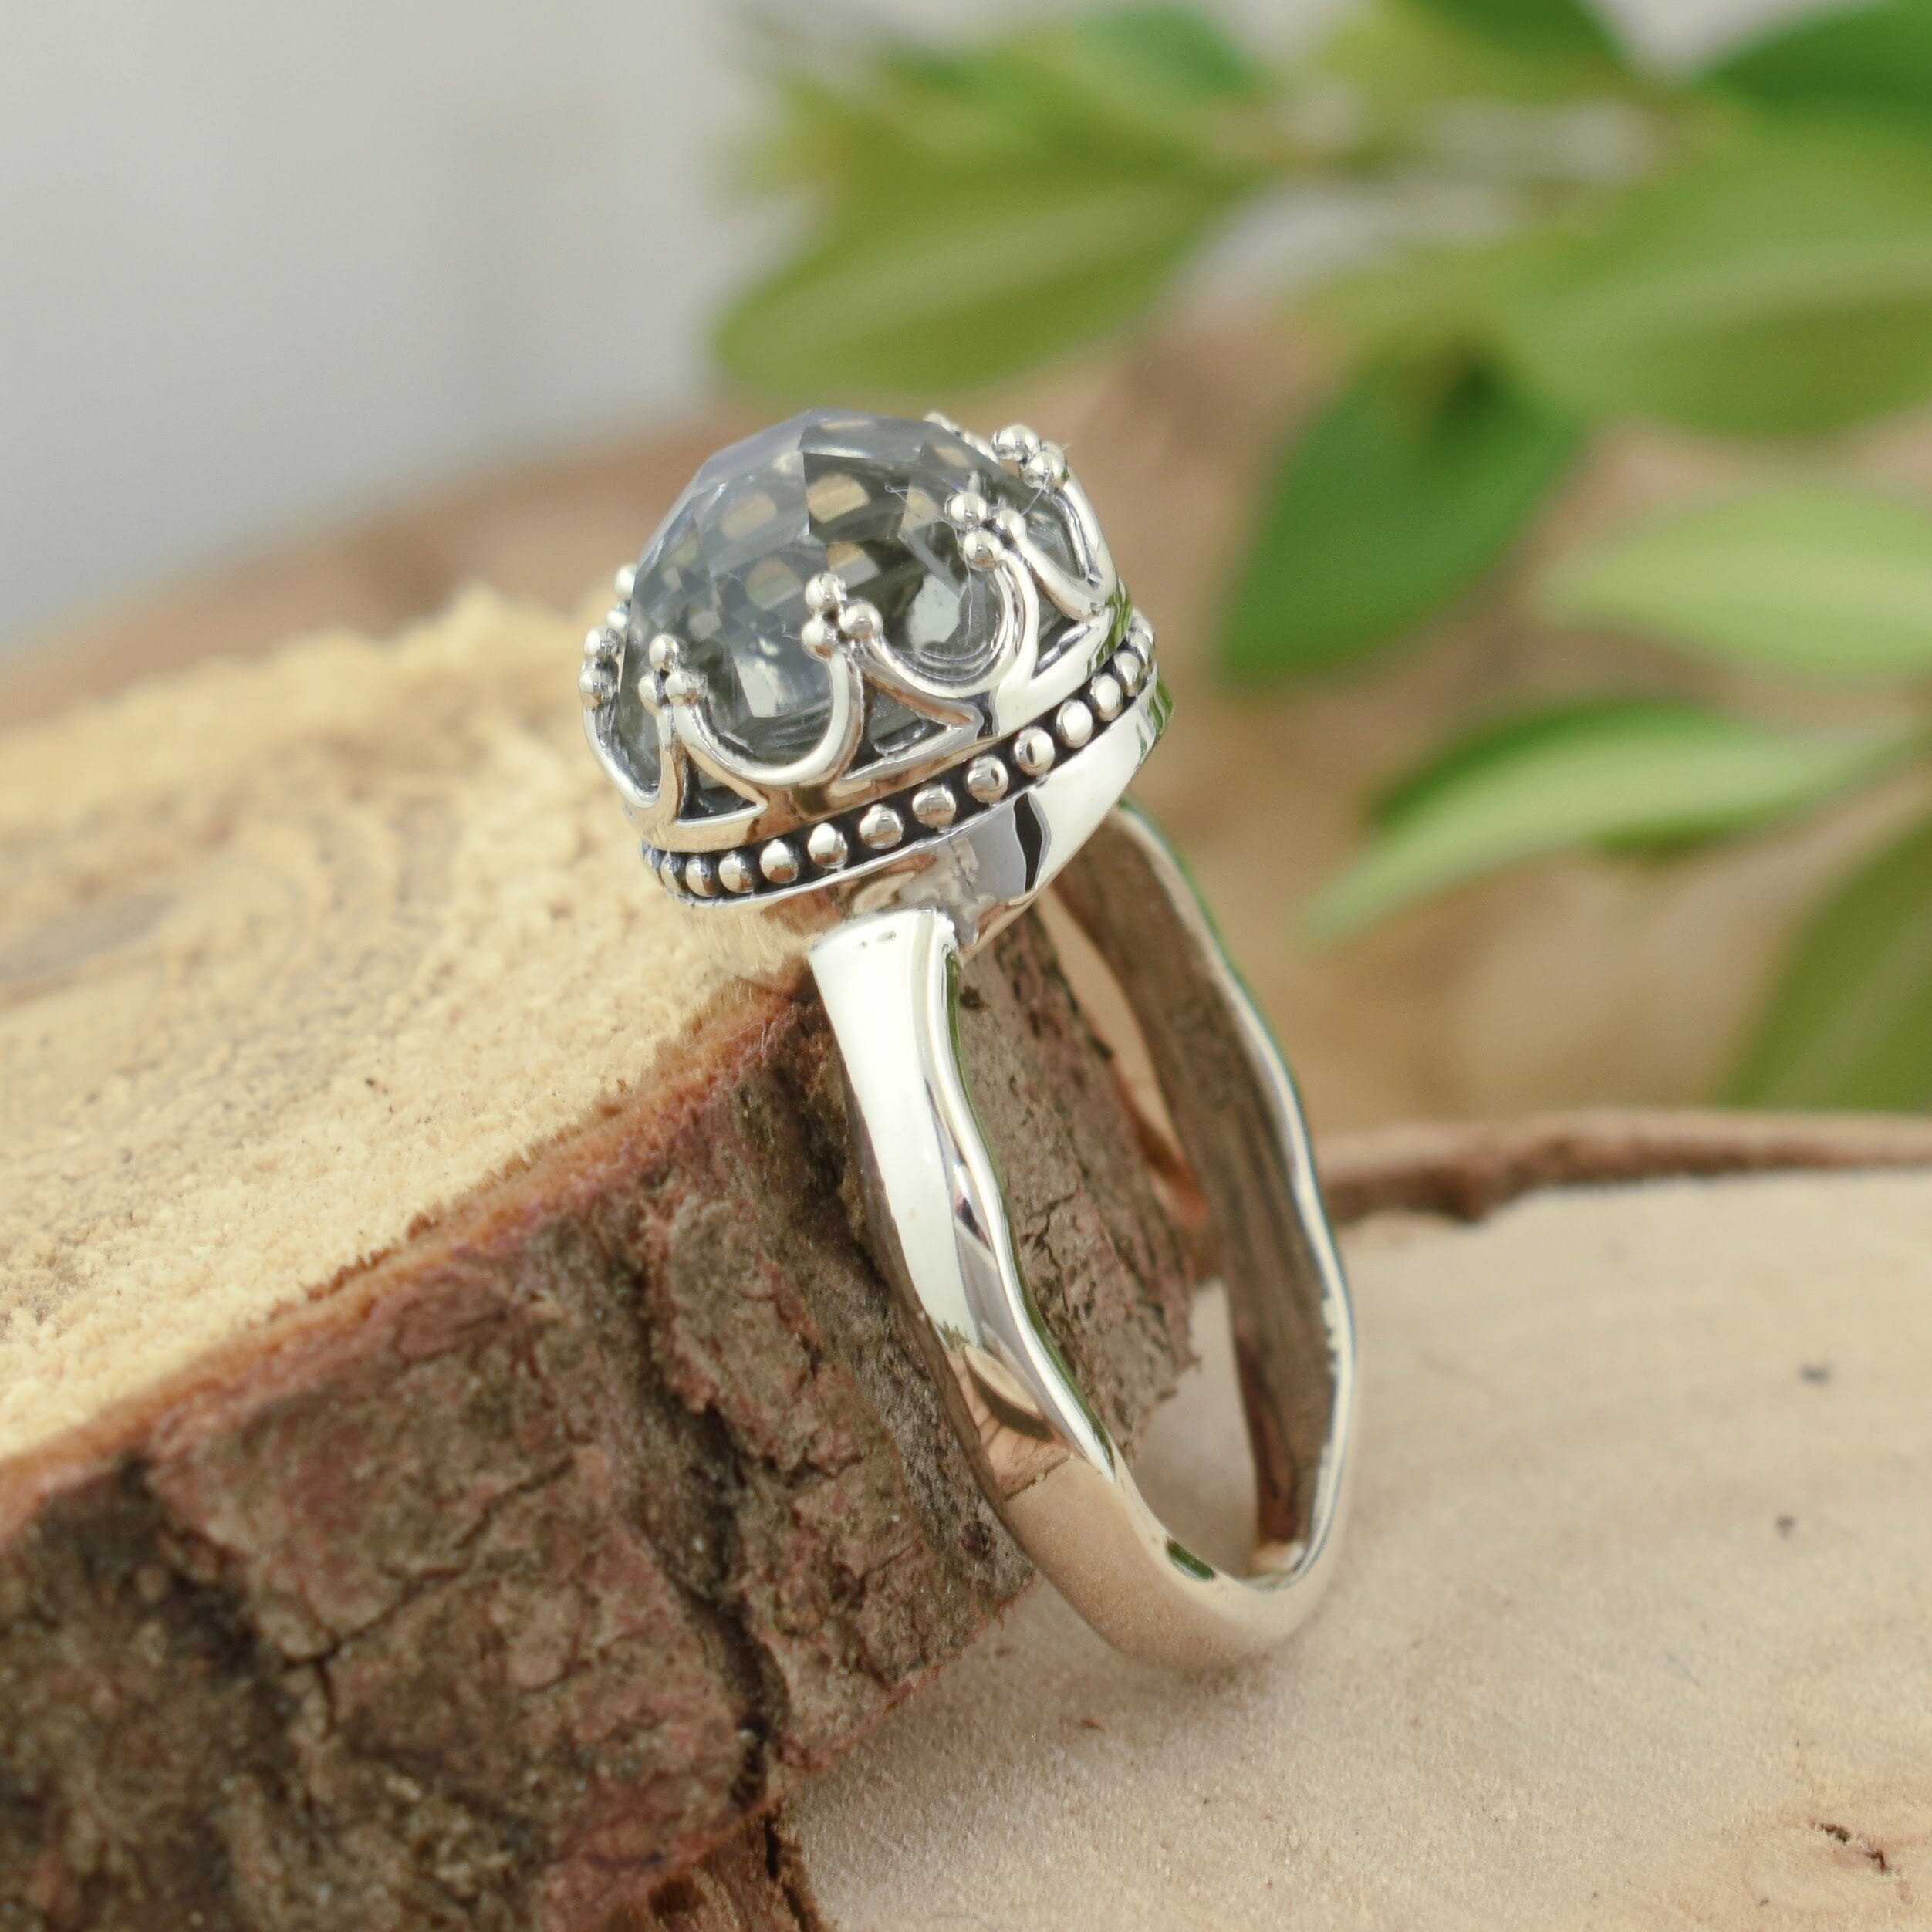 Crown-inspired ring with sterling silver and light green amethsyt stone